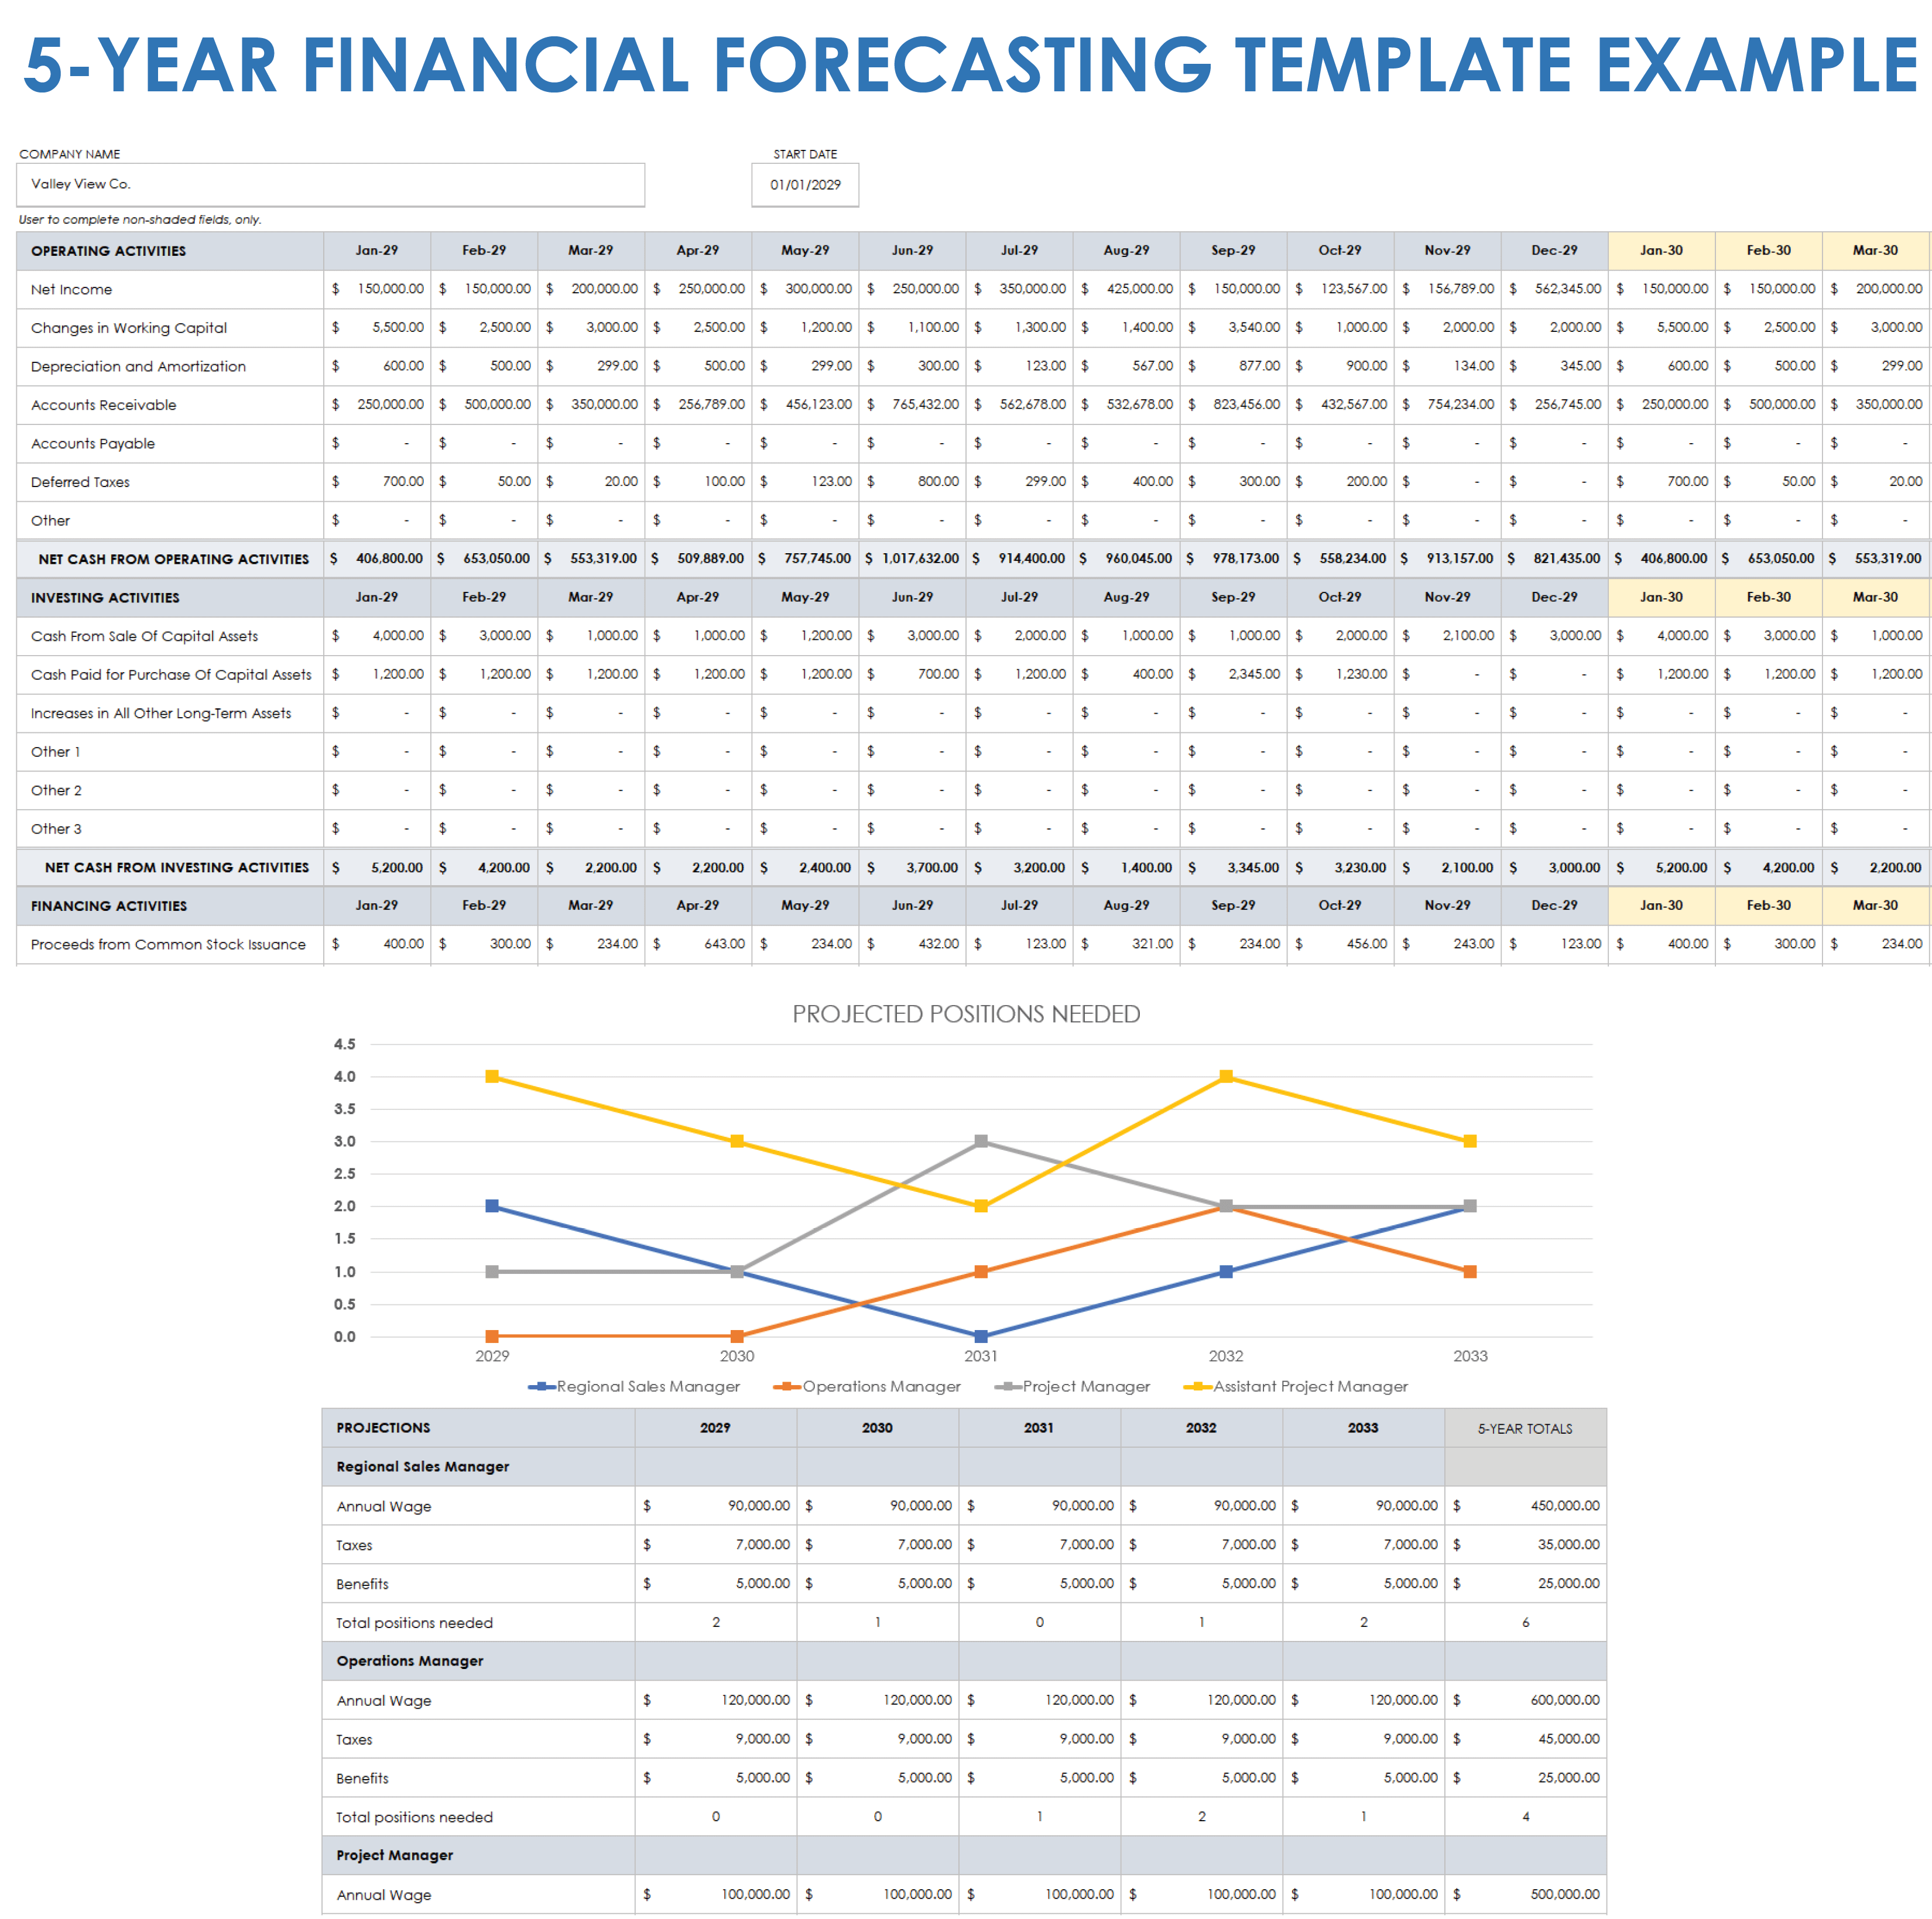 5-Year Financial Forecasting Example Template